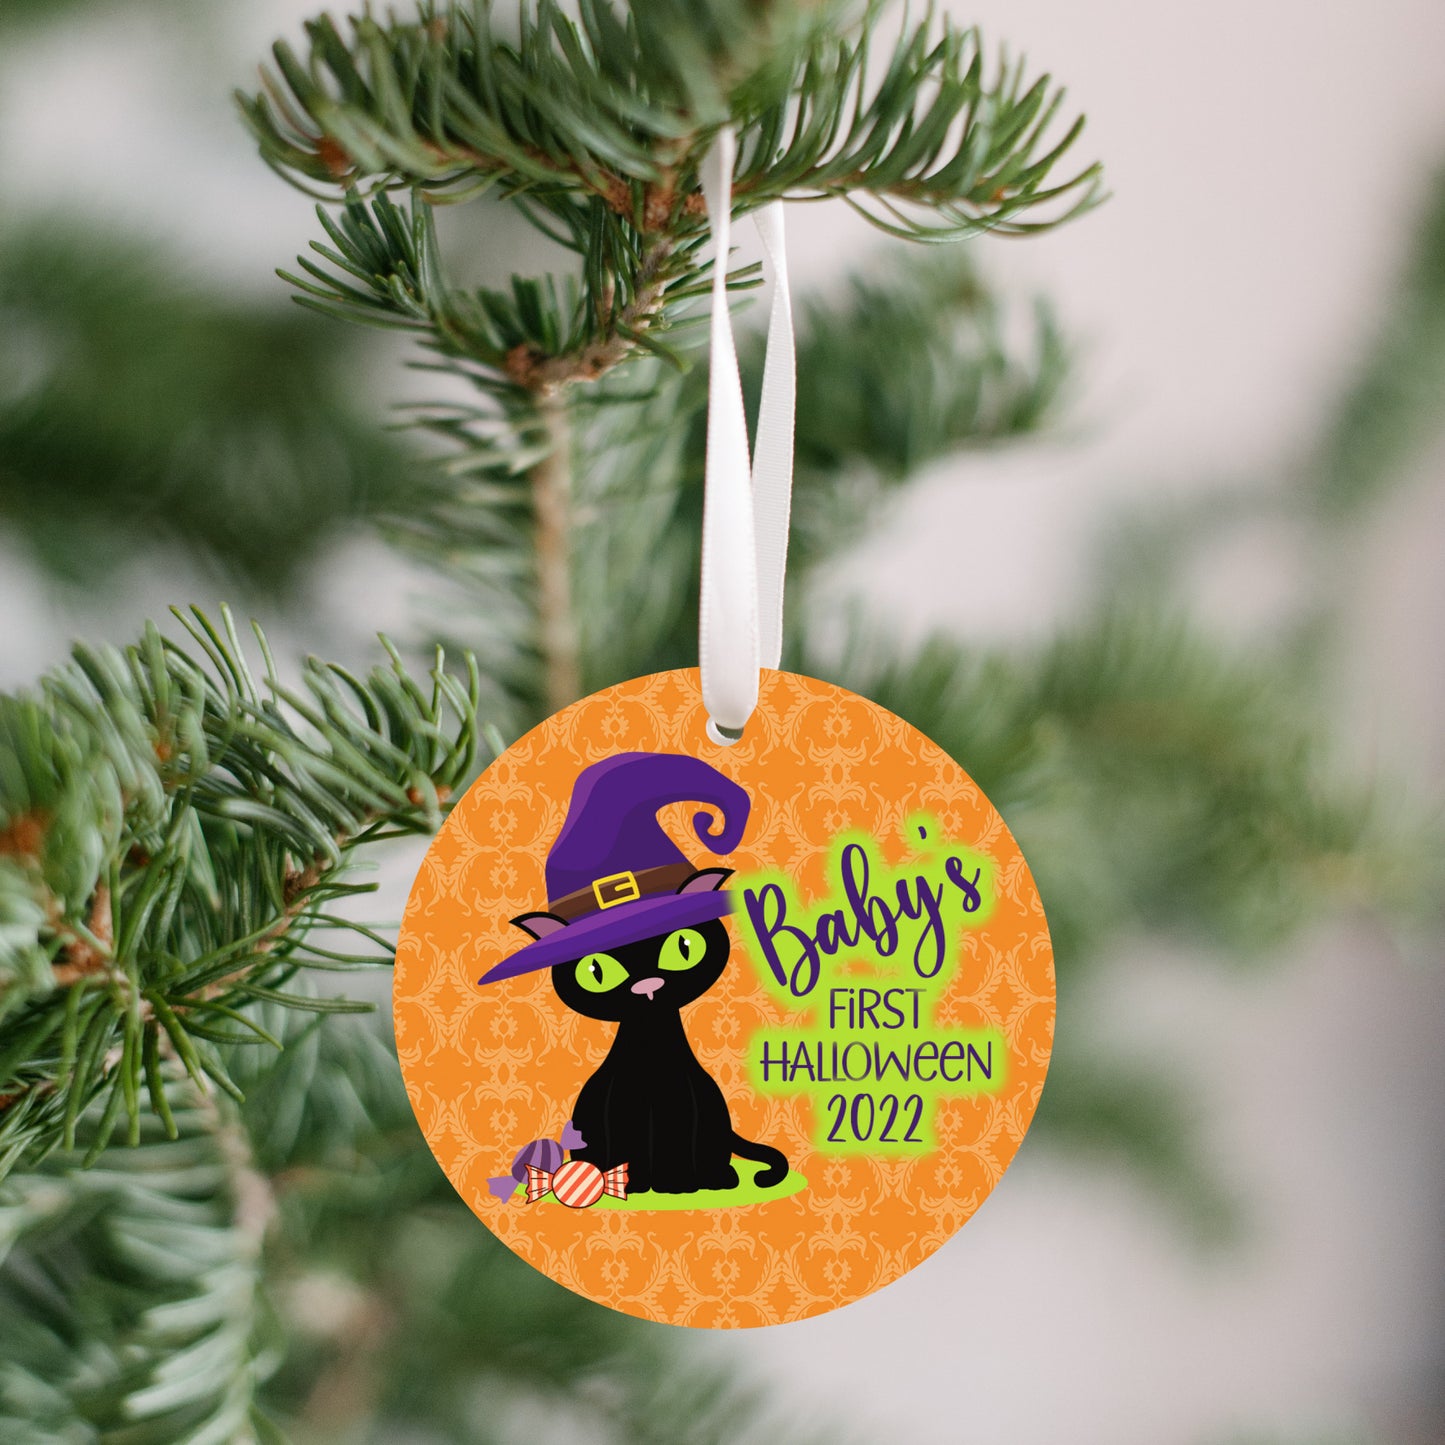 Baby's First Halloween 2022 Black Cat Ornament